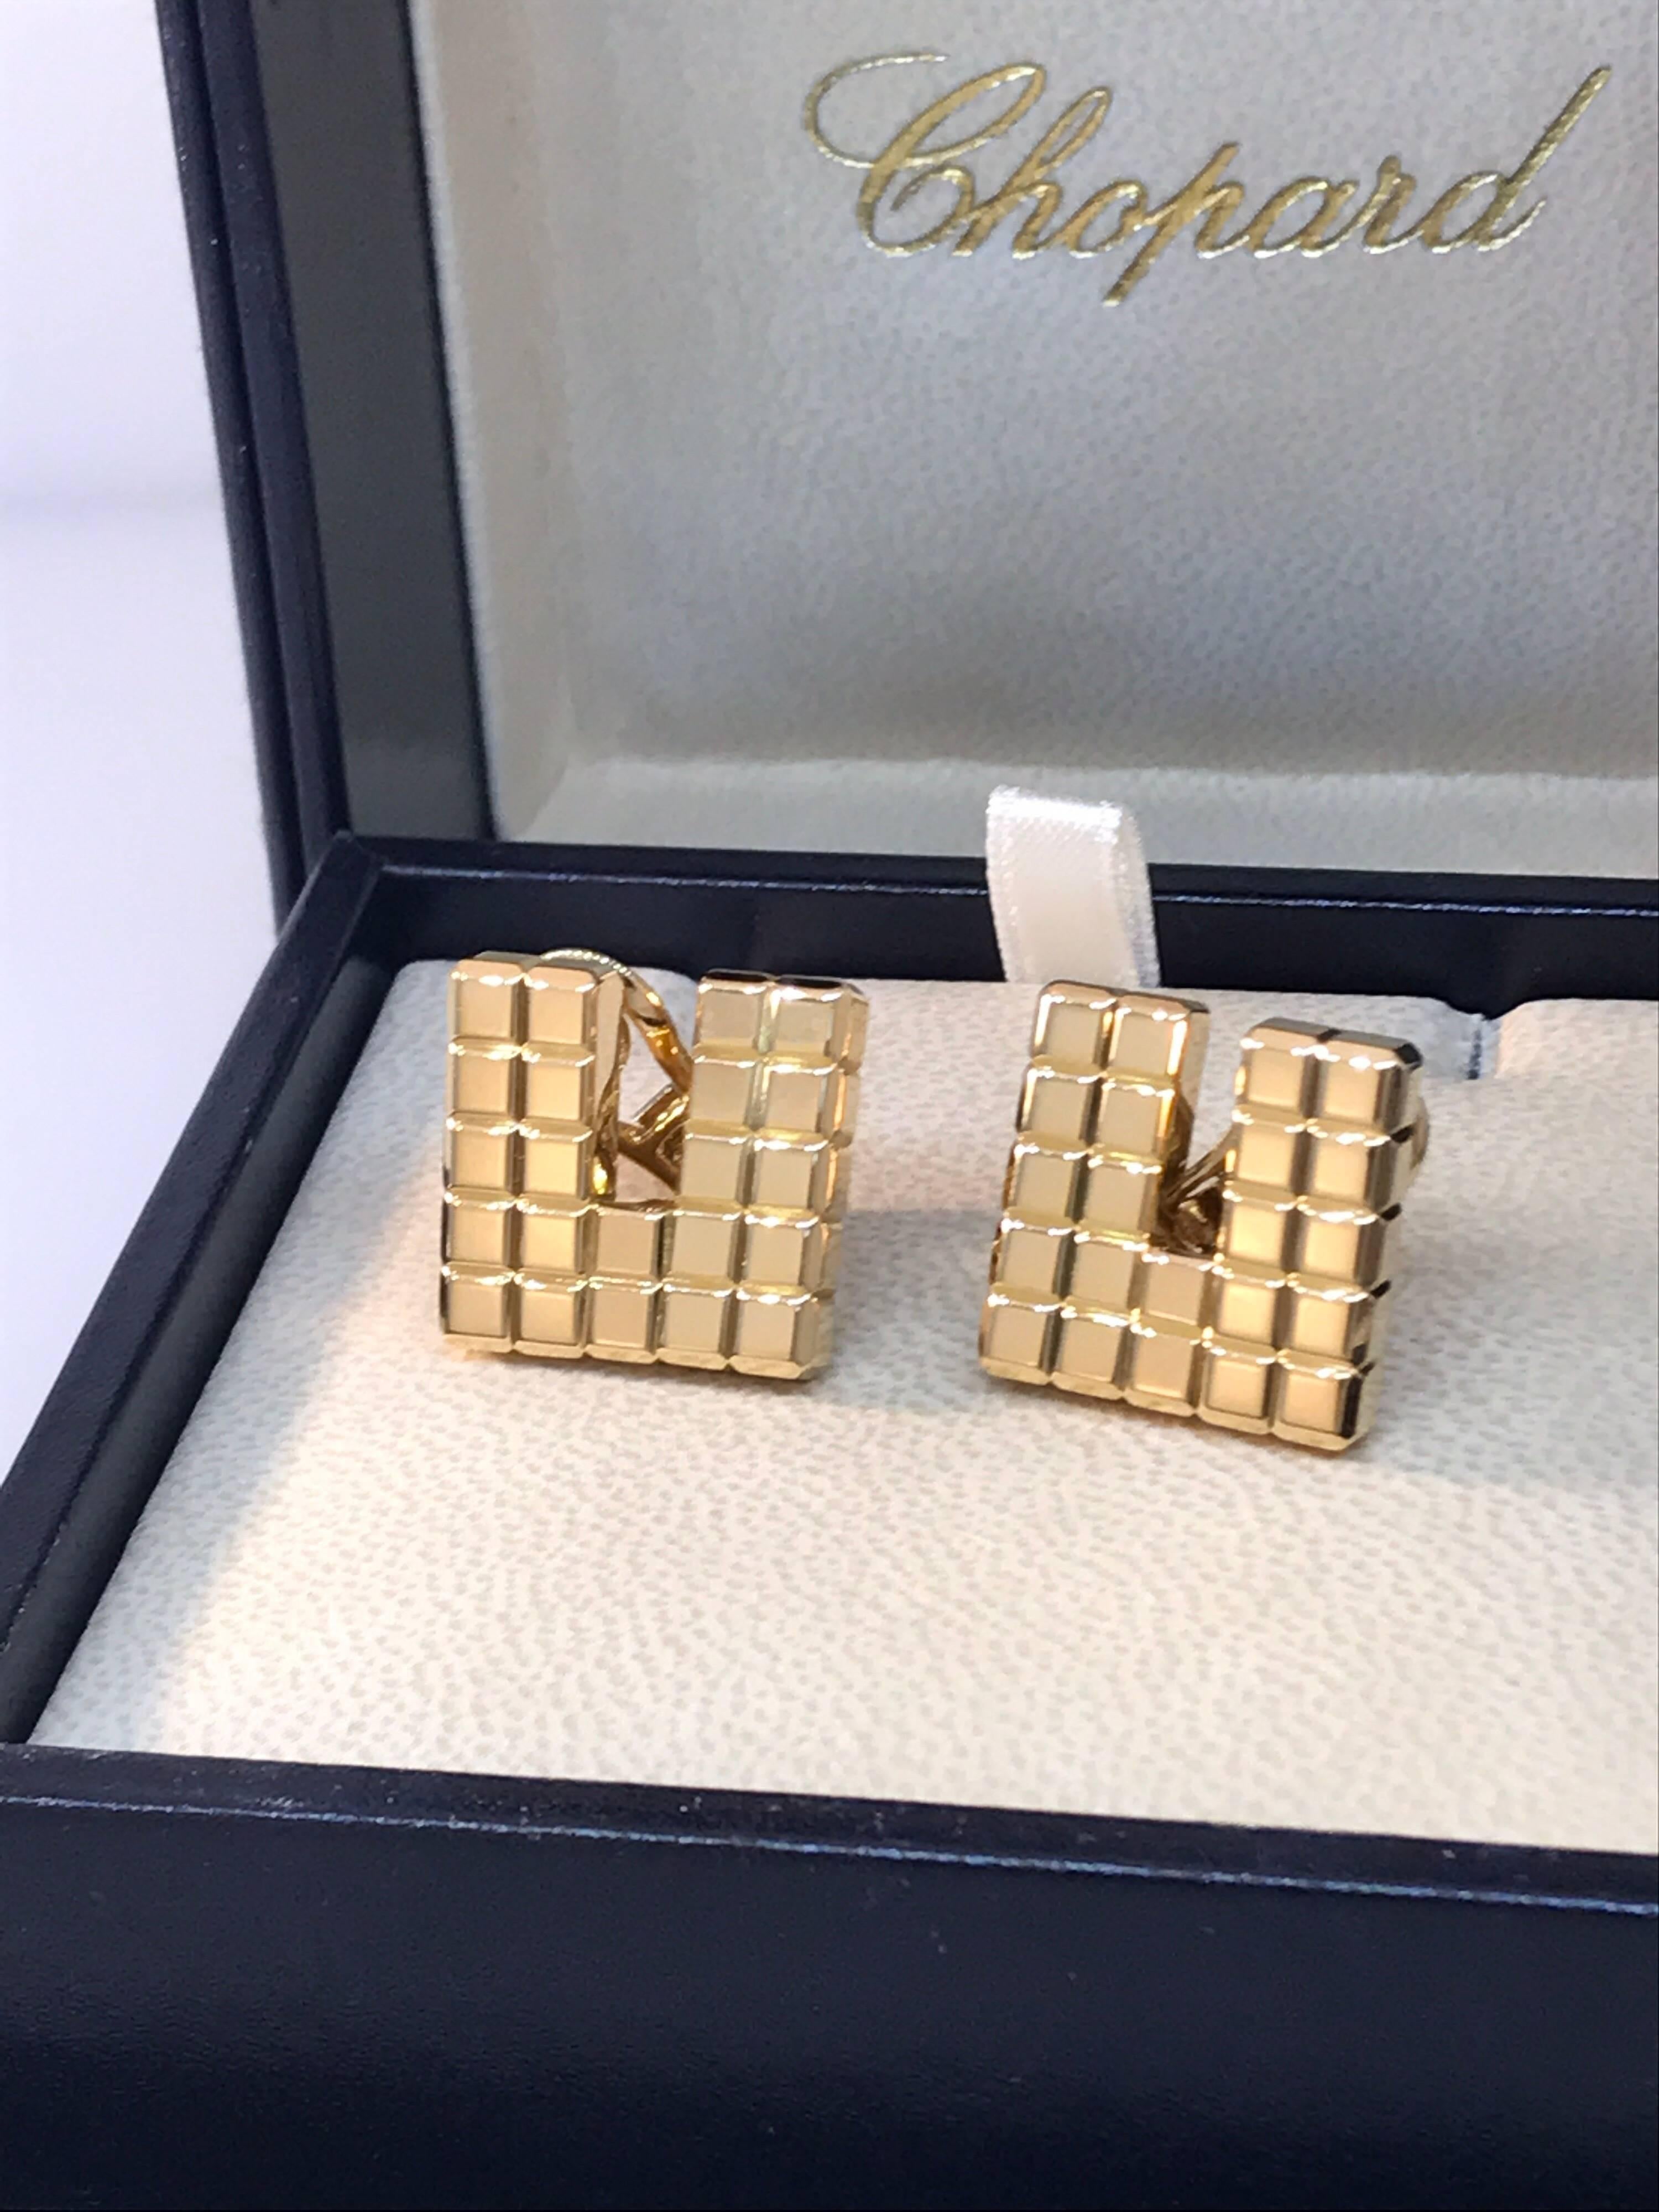 Chopard Ice Cube Large Earrings

Model Number: 84/4195-0001

100% Authentic

Brand New

Comes with original Chopard box, certificate of authenticity and warranty, and jewels manual

18 Karat Yellow Gold

Total weight of earrings: 27.20gr